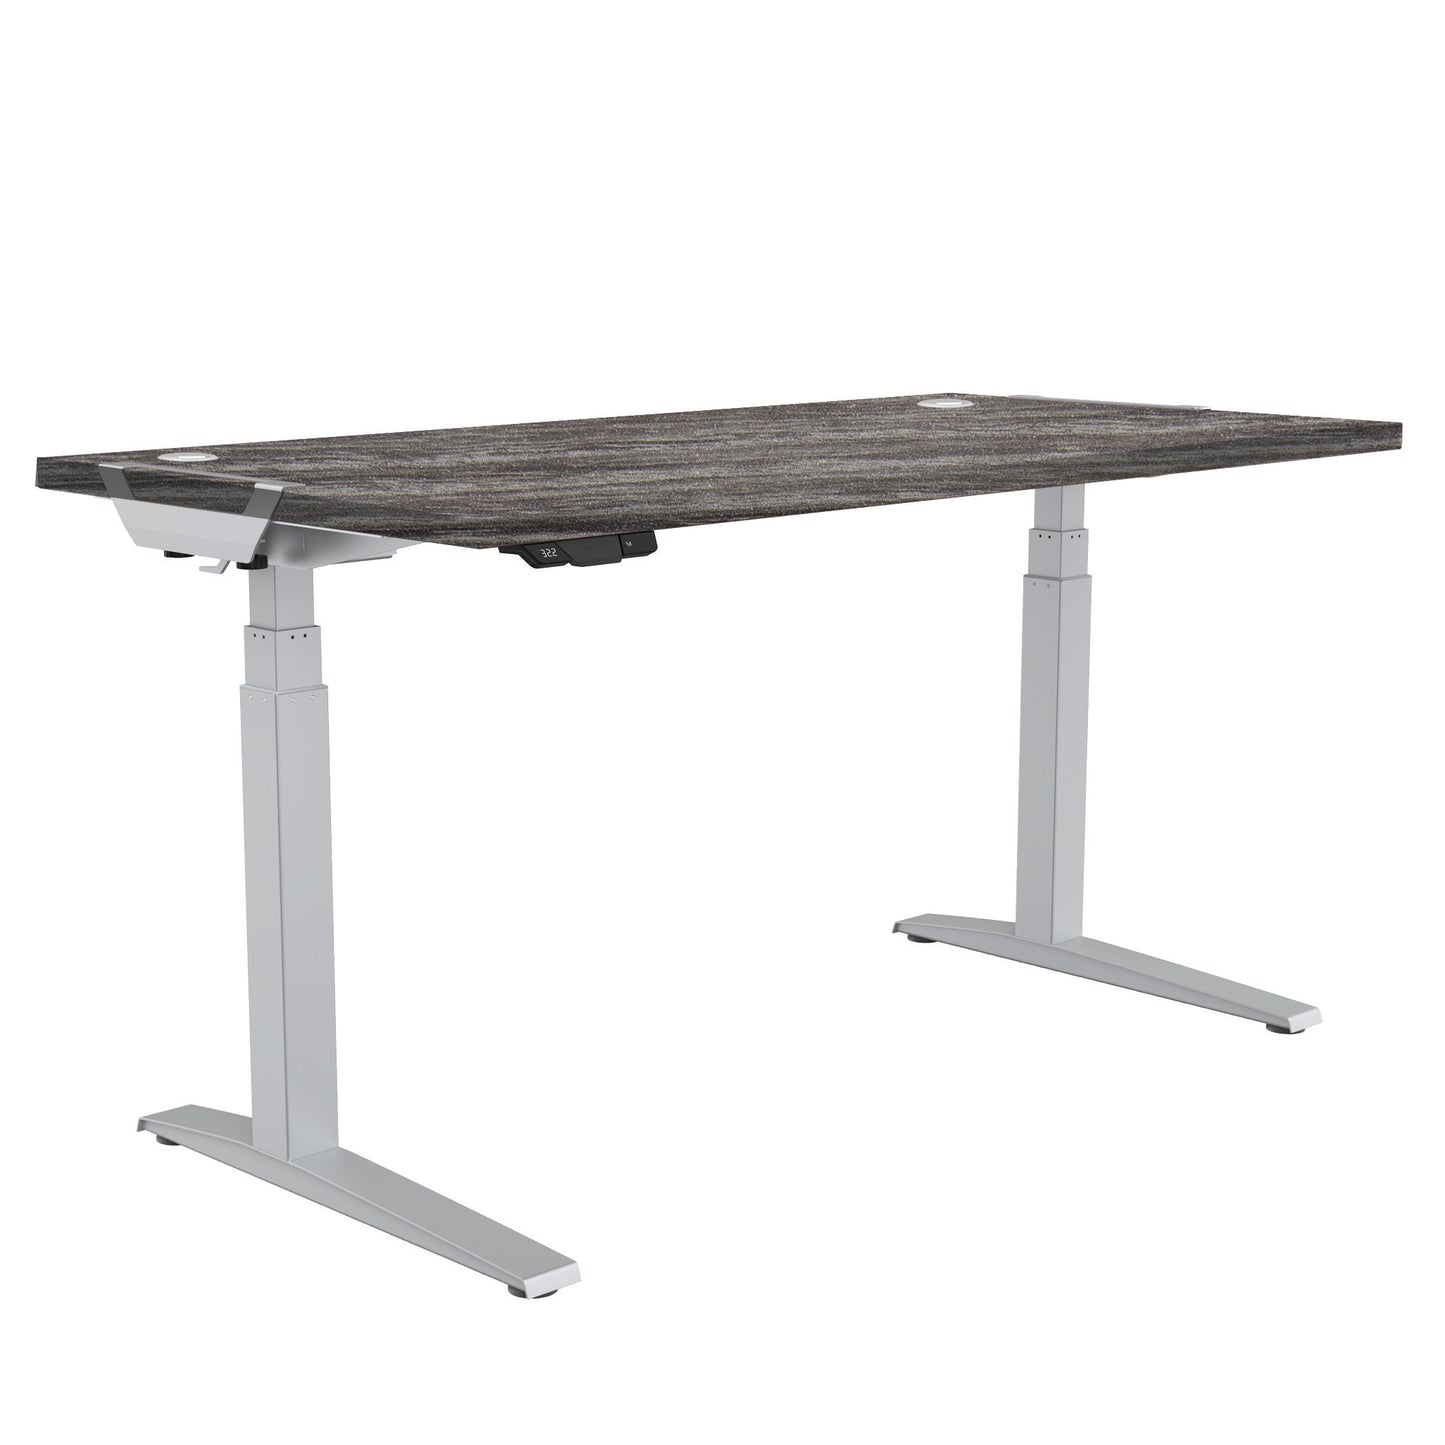 BUY FELOOWES Levado Height Adjustable Desk FREE SHIPPING 8949401. Standing desk/sit stand desk/stand up desk available with Newport oak table tops.